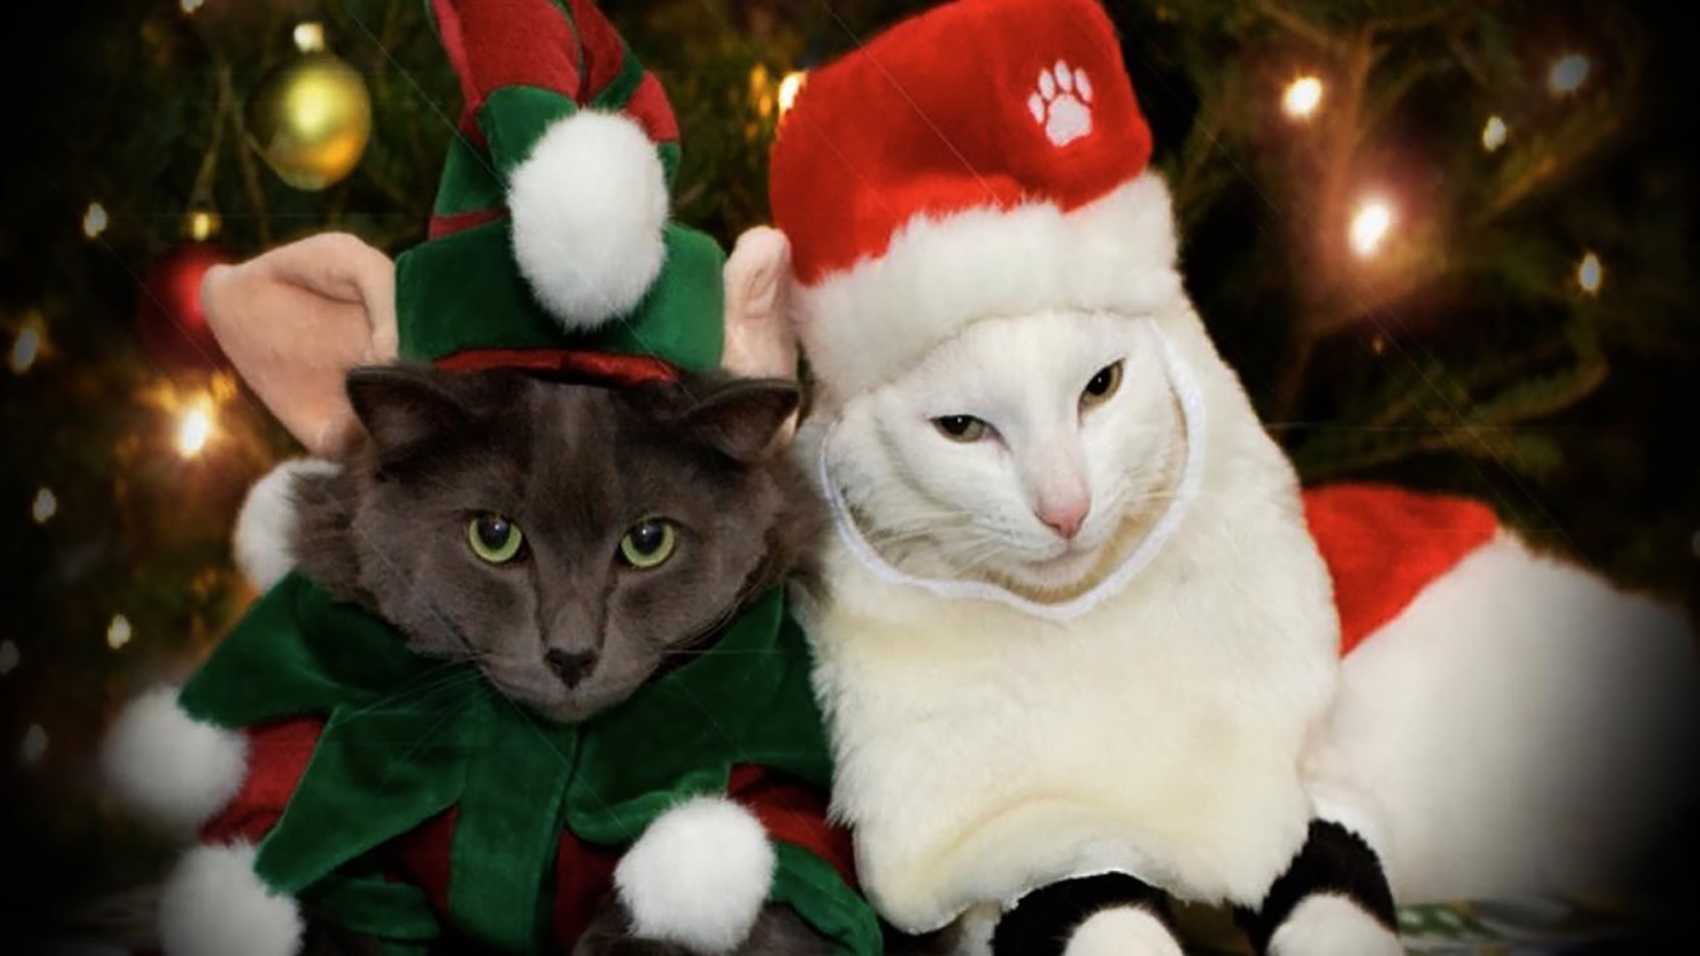 Here Are Some Photos Of Pets Wearing Christmas Outfits ...